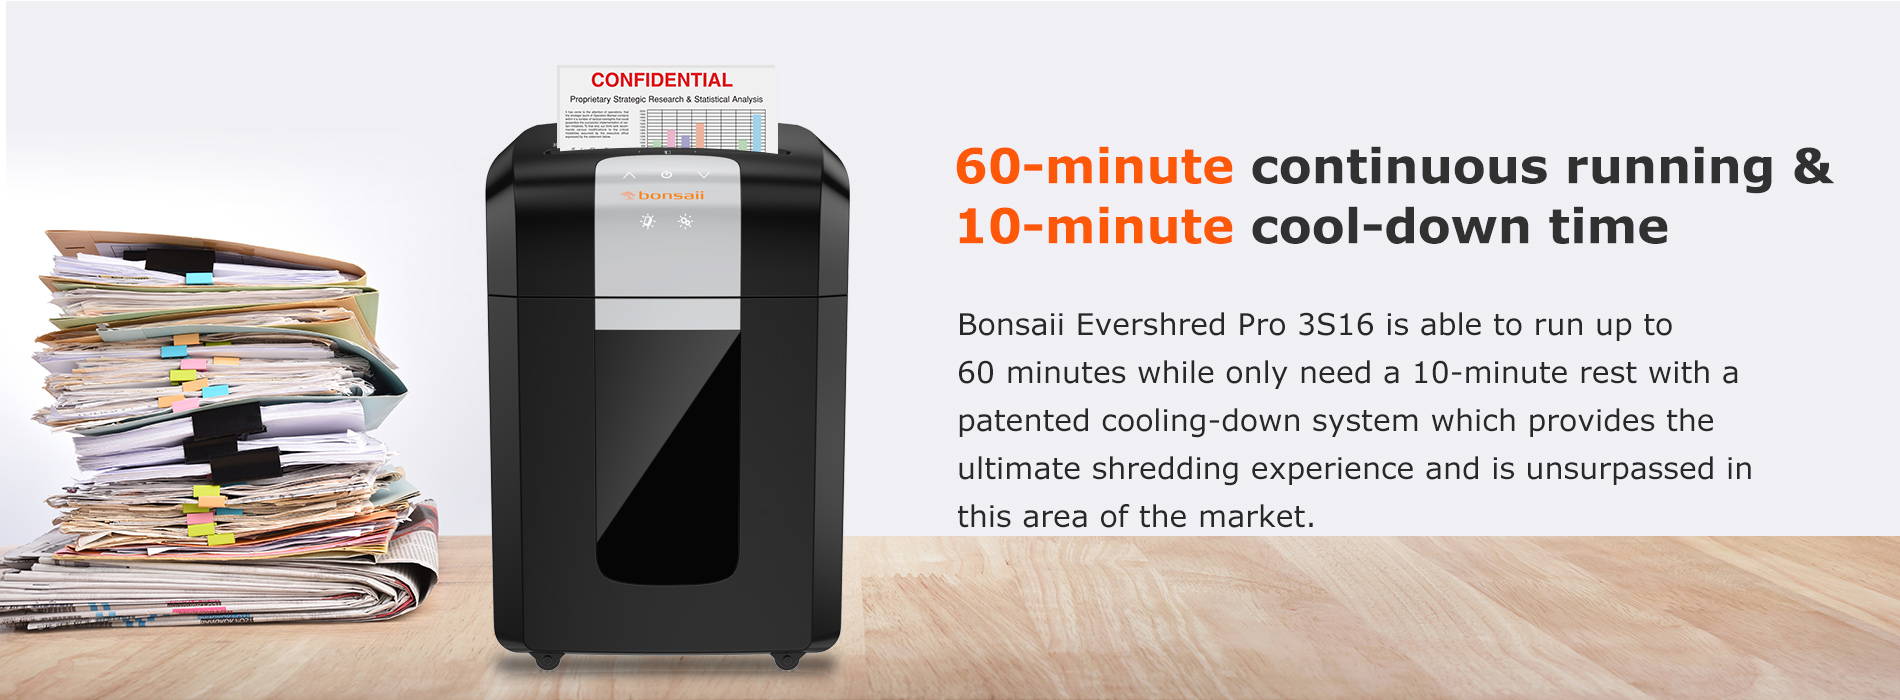 60-minute continuous running & 9-minute cool-down time Bonsaii Evershred Pro 3S16 is able to run up to 60 minutes while only need a 9-minute rest with a patented cooling-down system which provides the ultimate shredding experience and is unsurpassed in this area of the market.